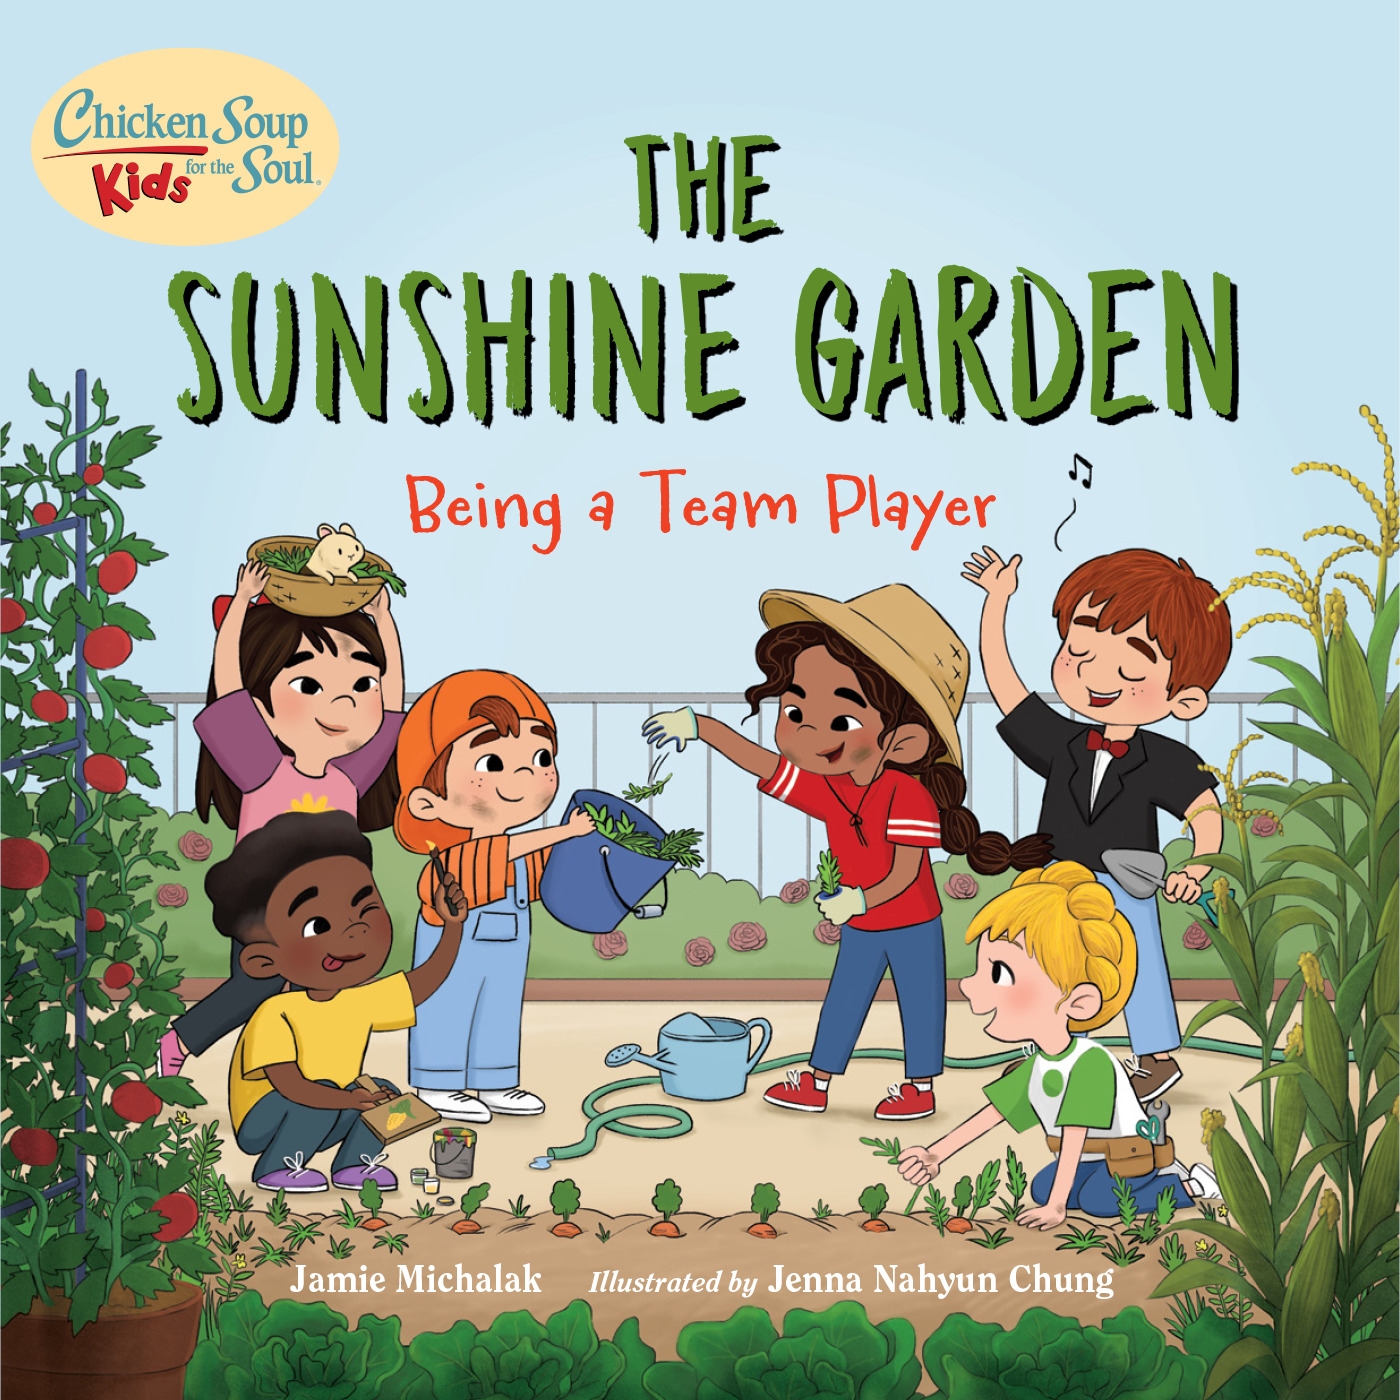 Chicken Soup for the Soul KIDS: The Sunshine Garden by Jamie Michalak ...